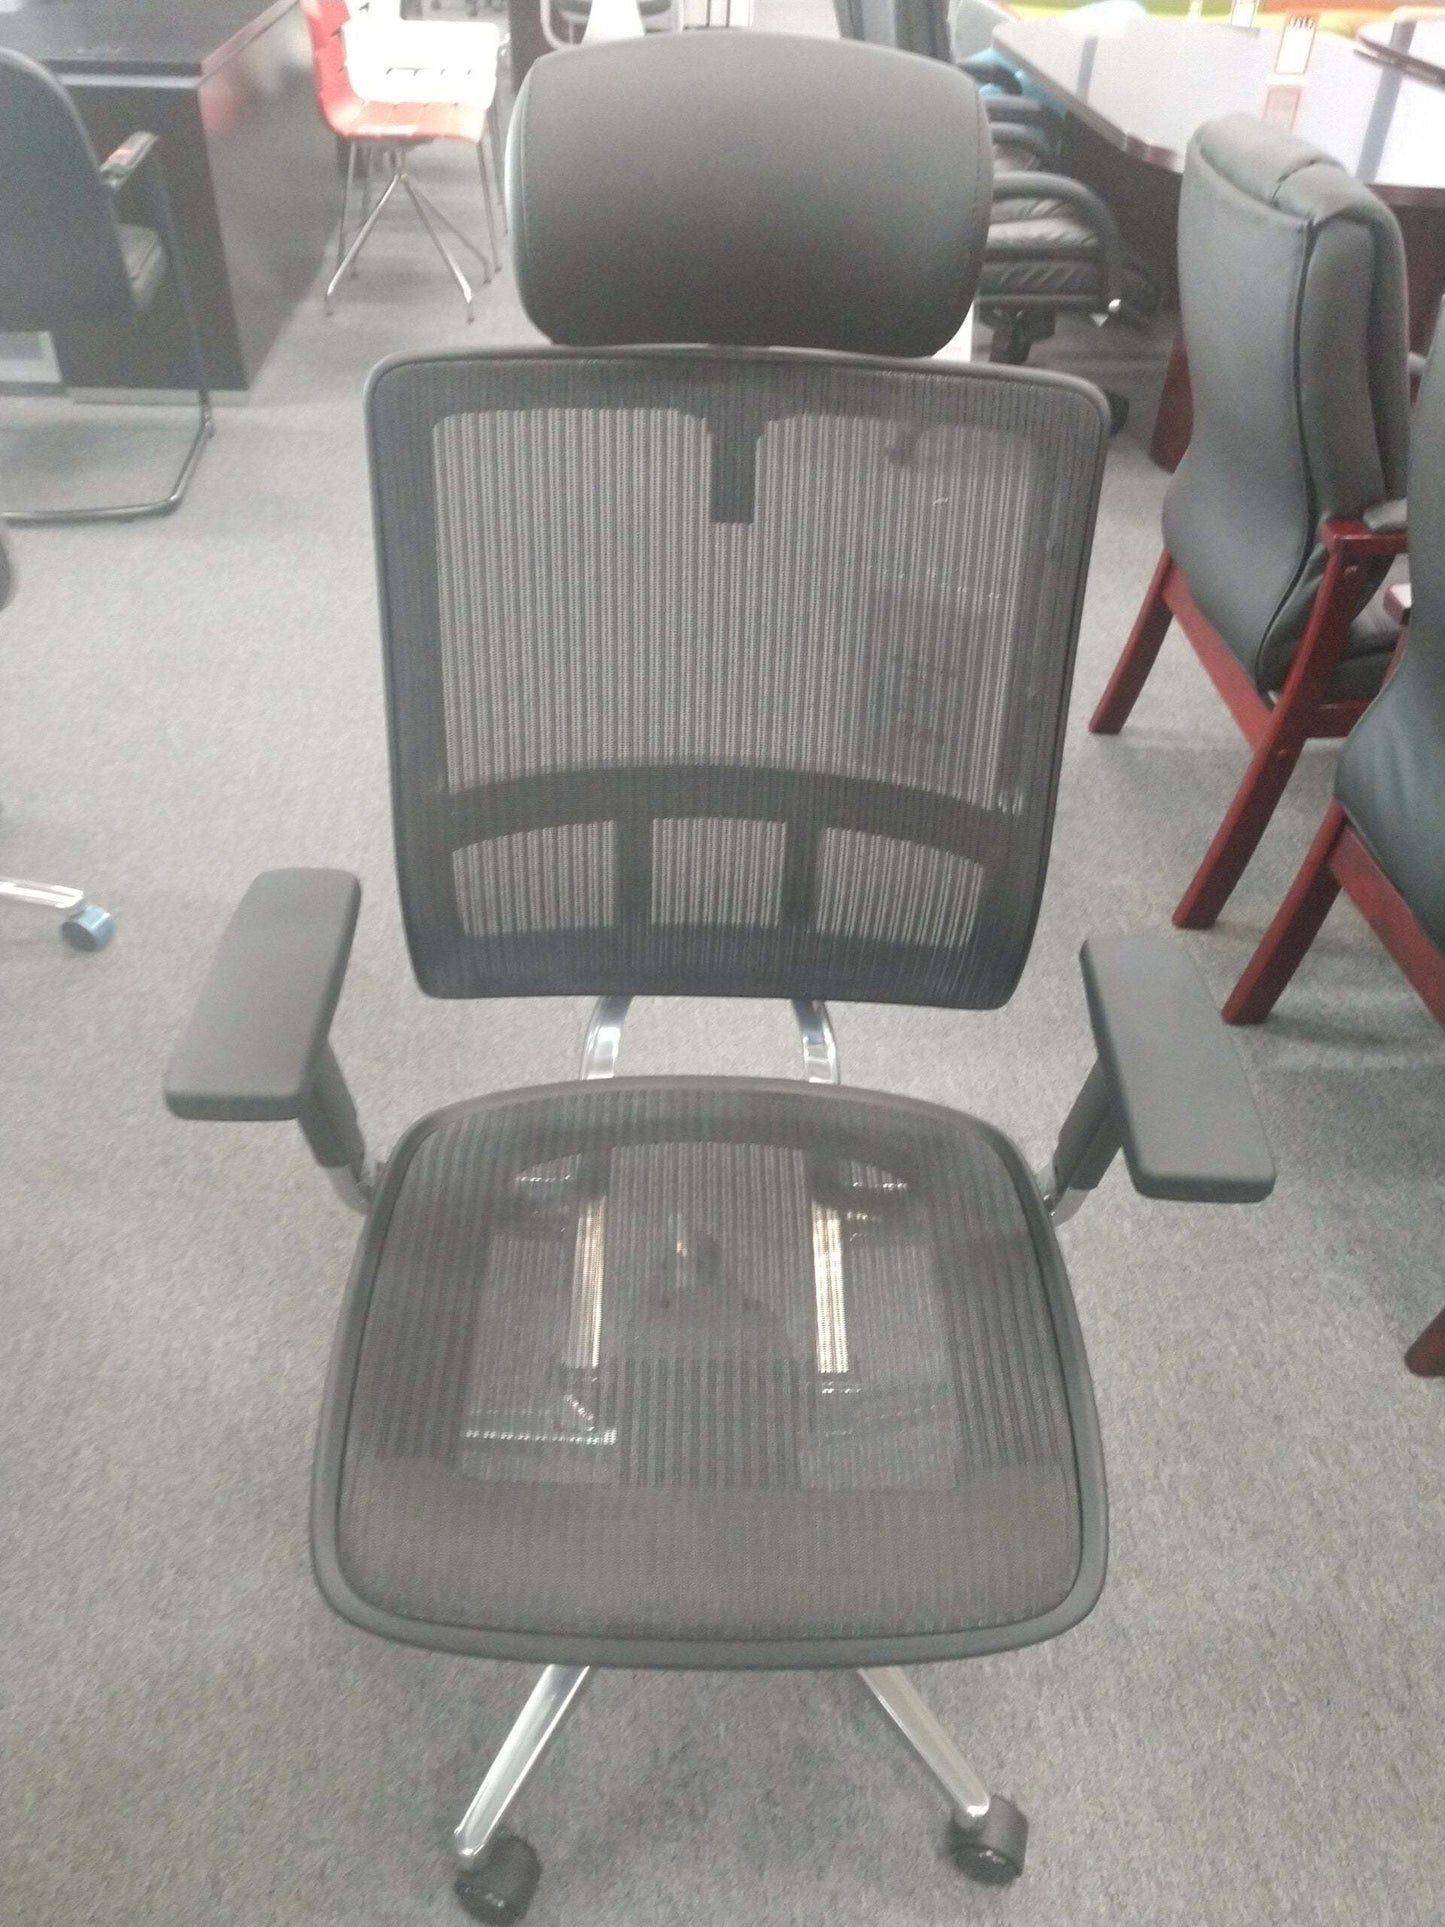 New - Fursys Mesh Back Executive Chair